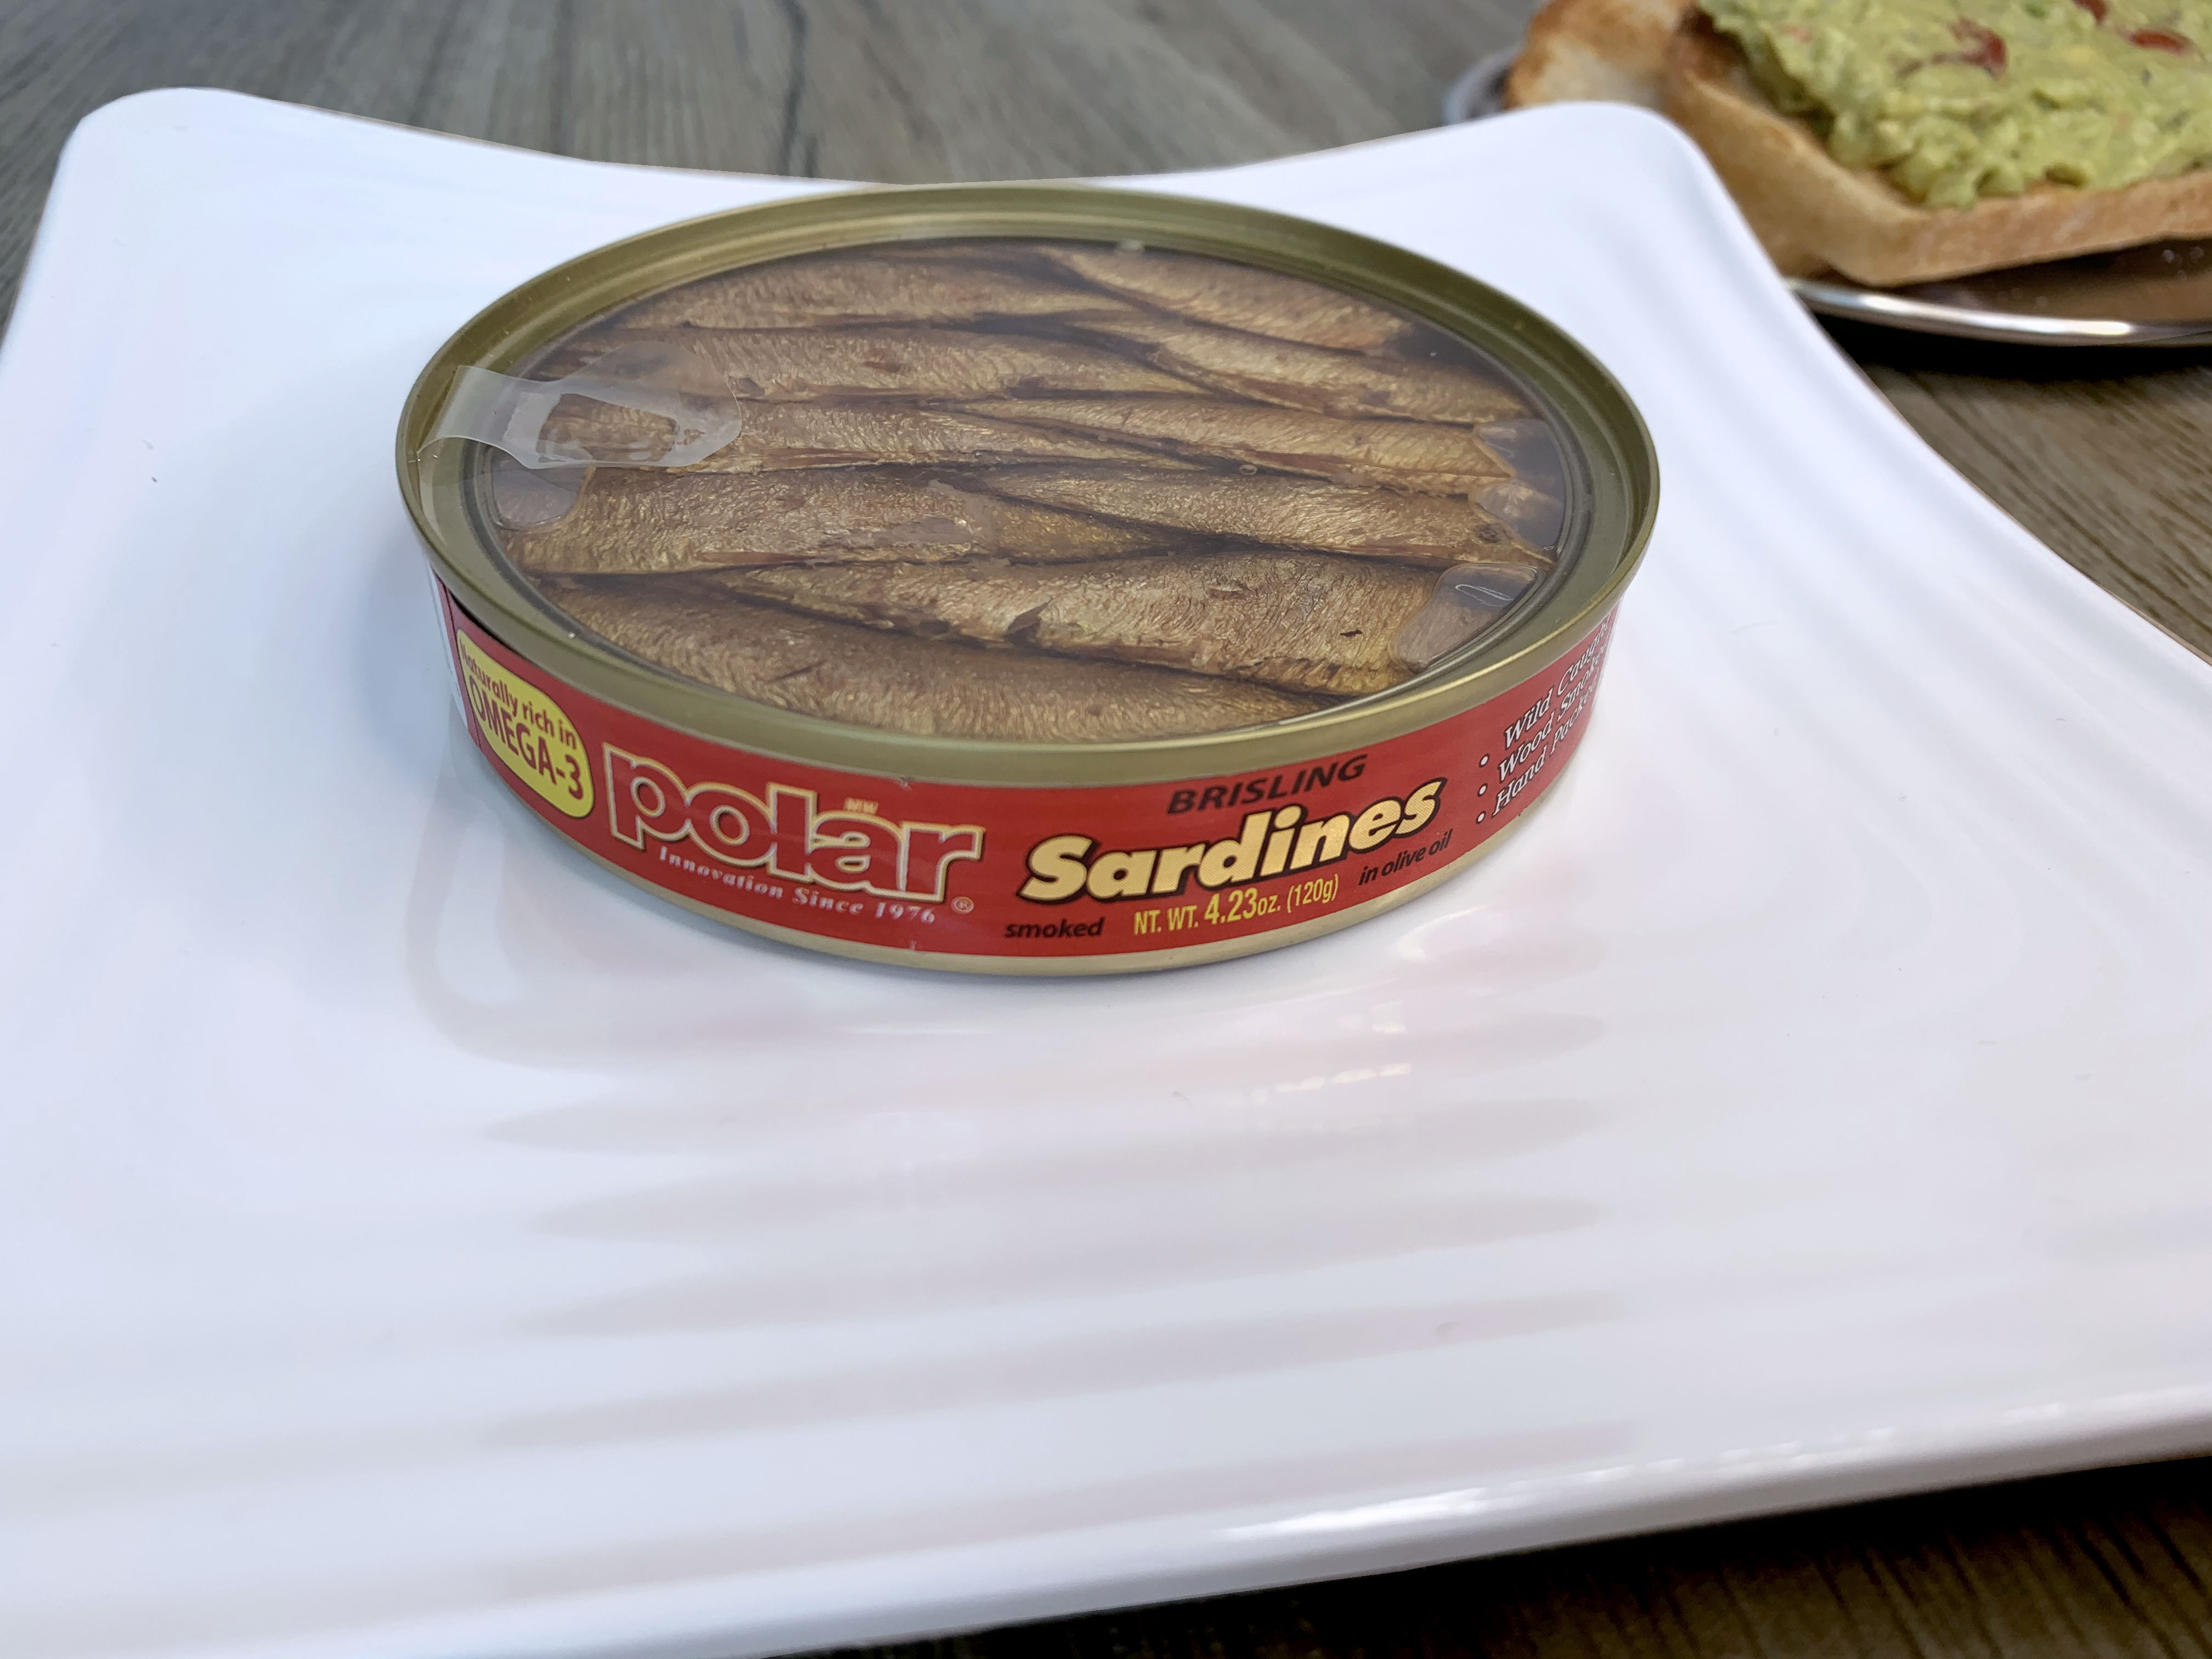 Read Polar Brisling Sardines Smoked in Olive Oil Review